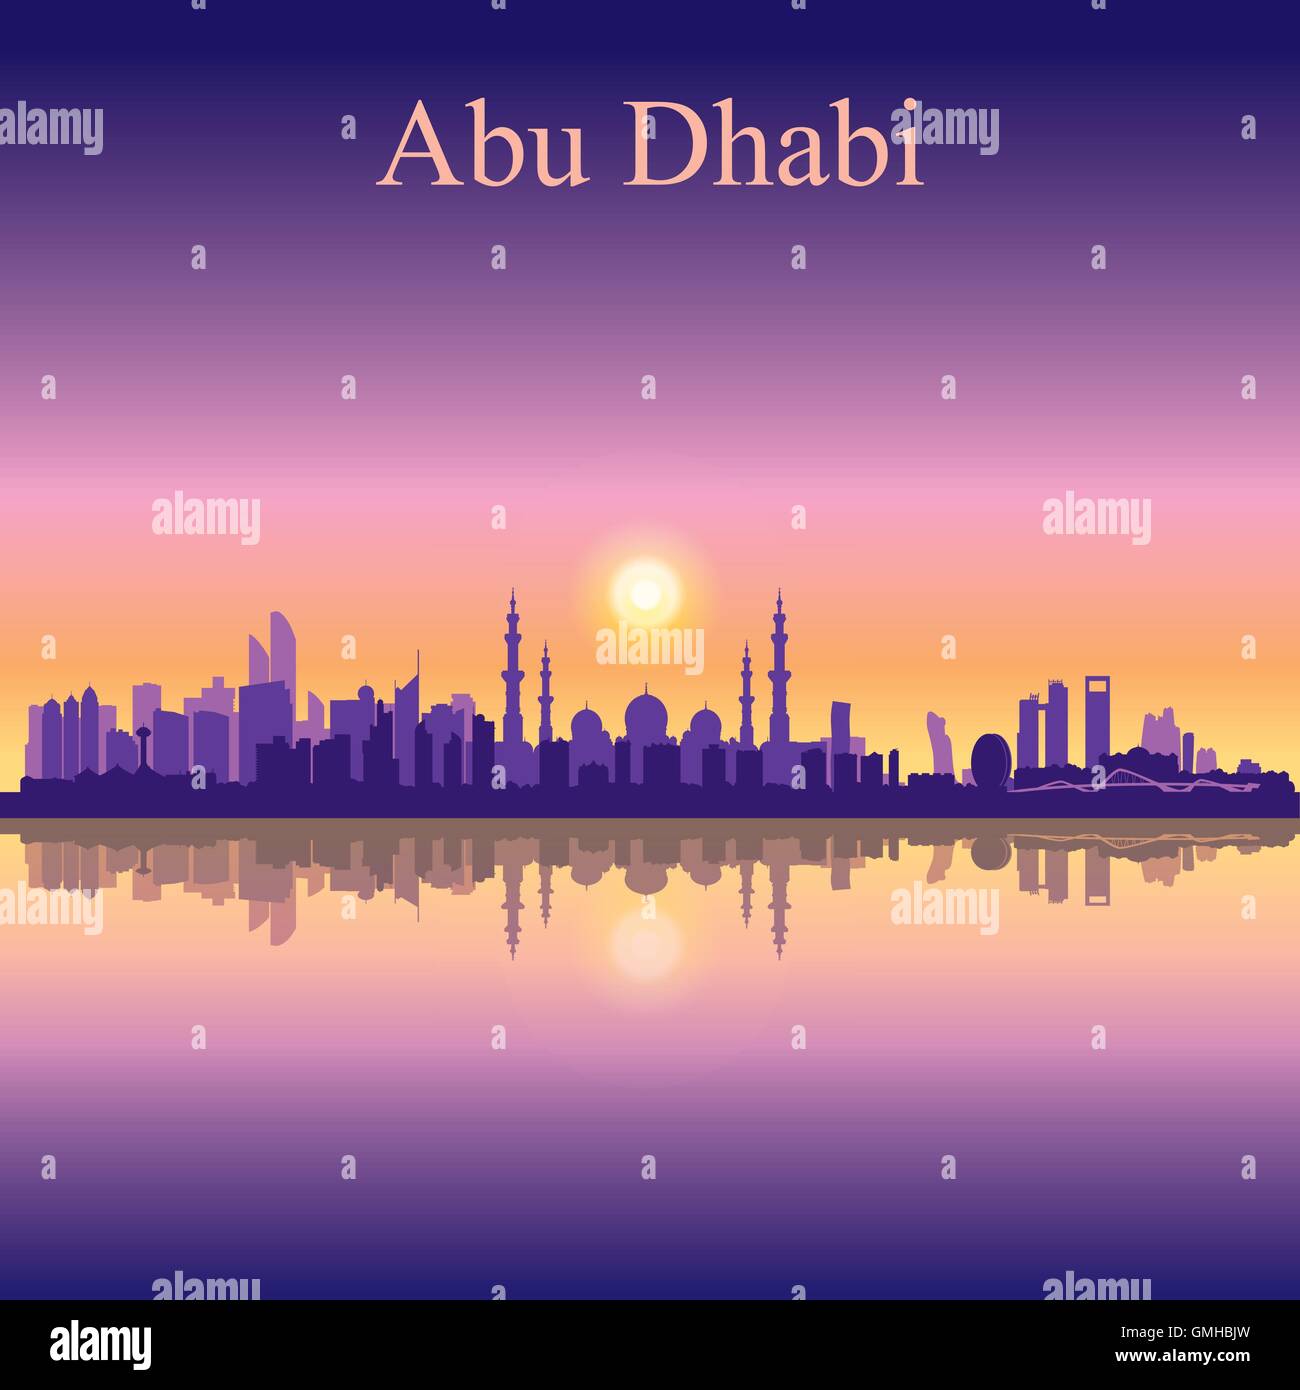 Abu Dhabi skyline silhouette background with a Grand Mosque Stock Vector